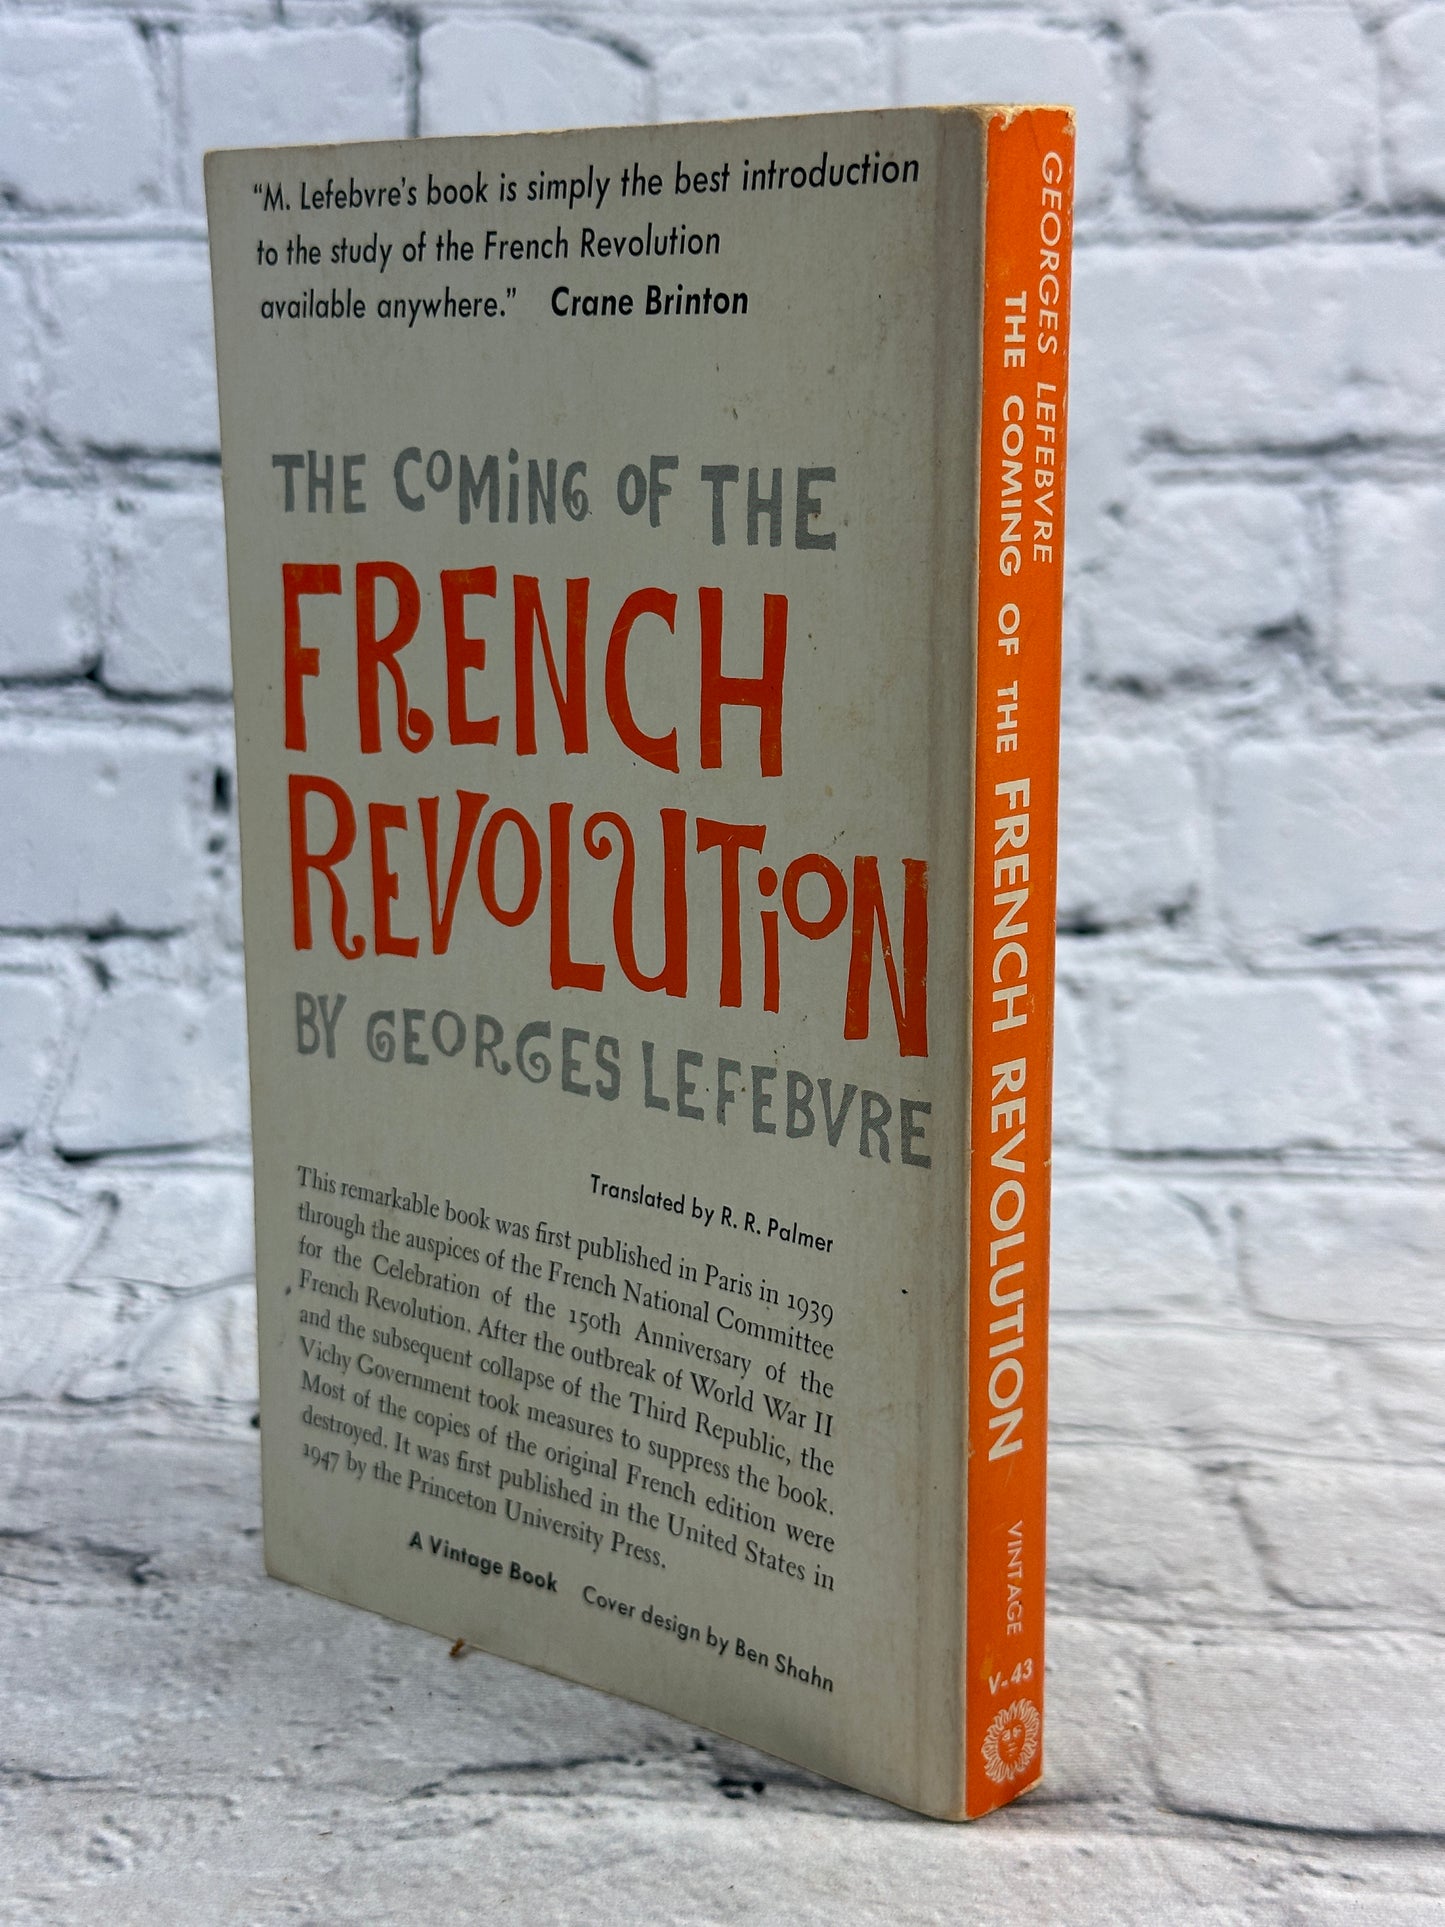 The Coming of the French Revolution by Georges Lefebvre [1947]